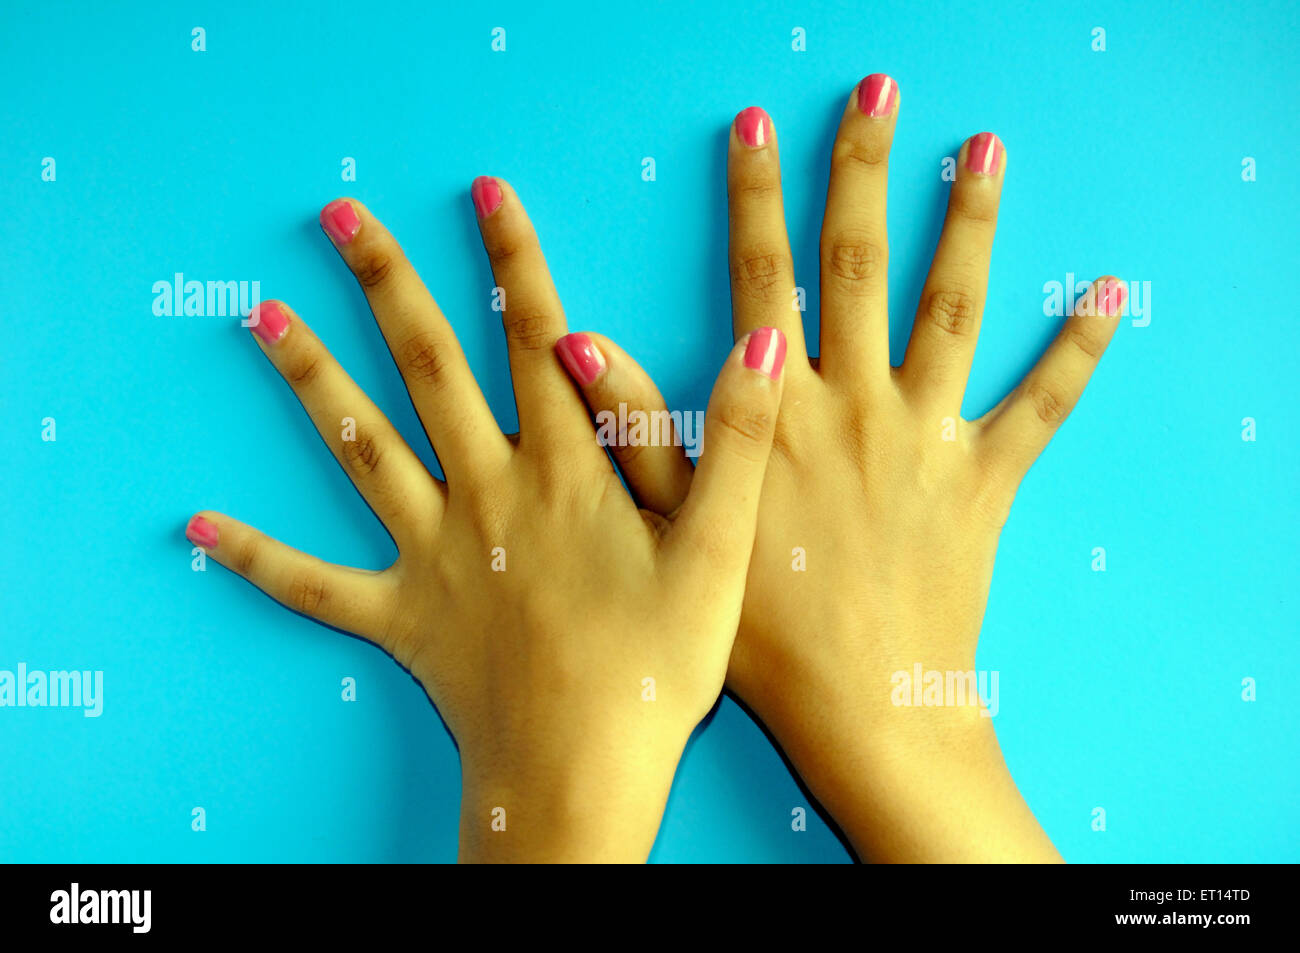 Hands with pink nail polish on blue background Stock Photo